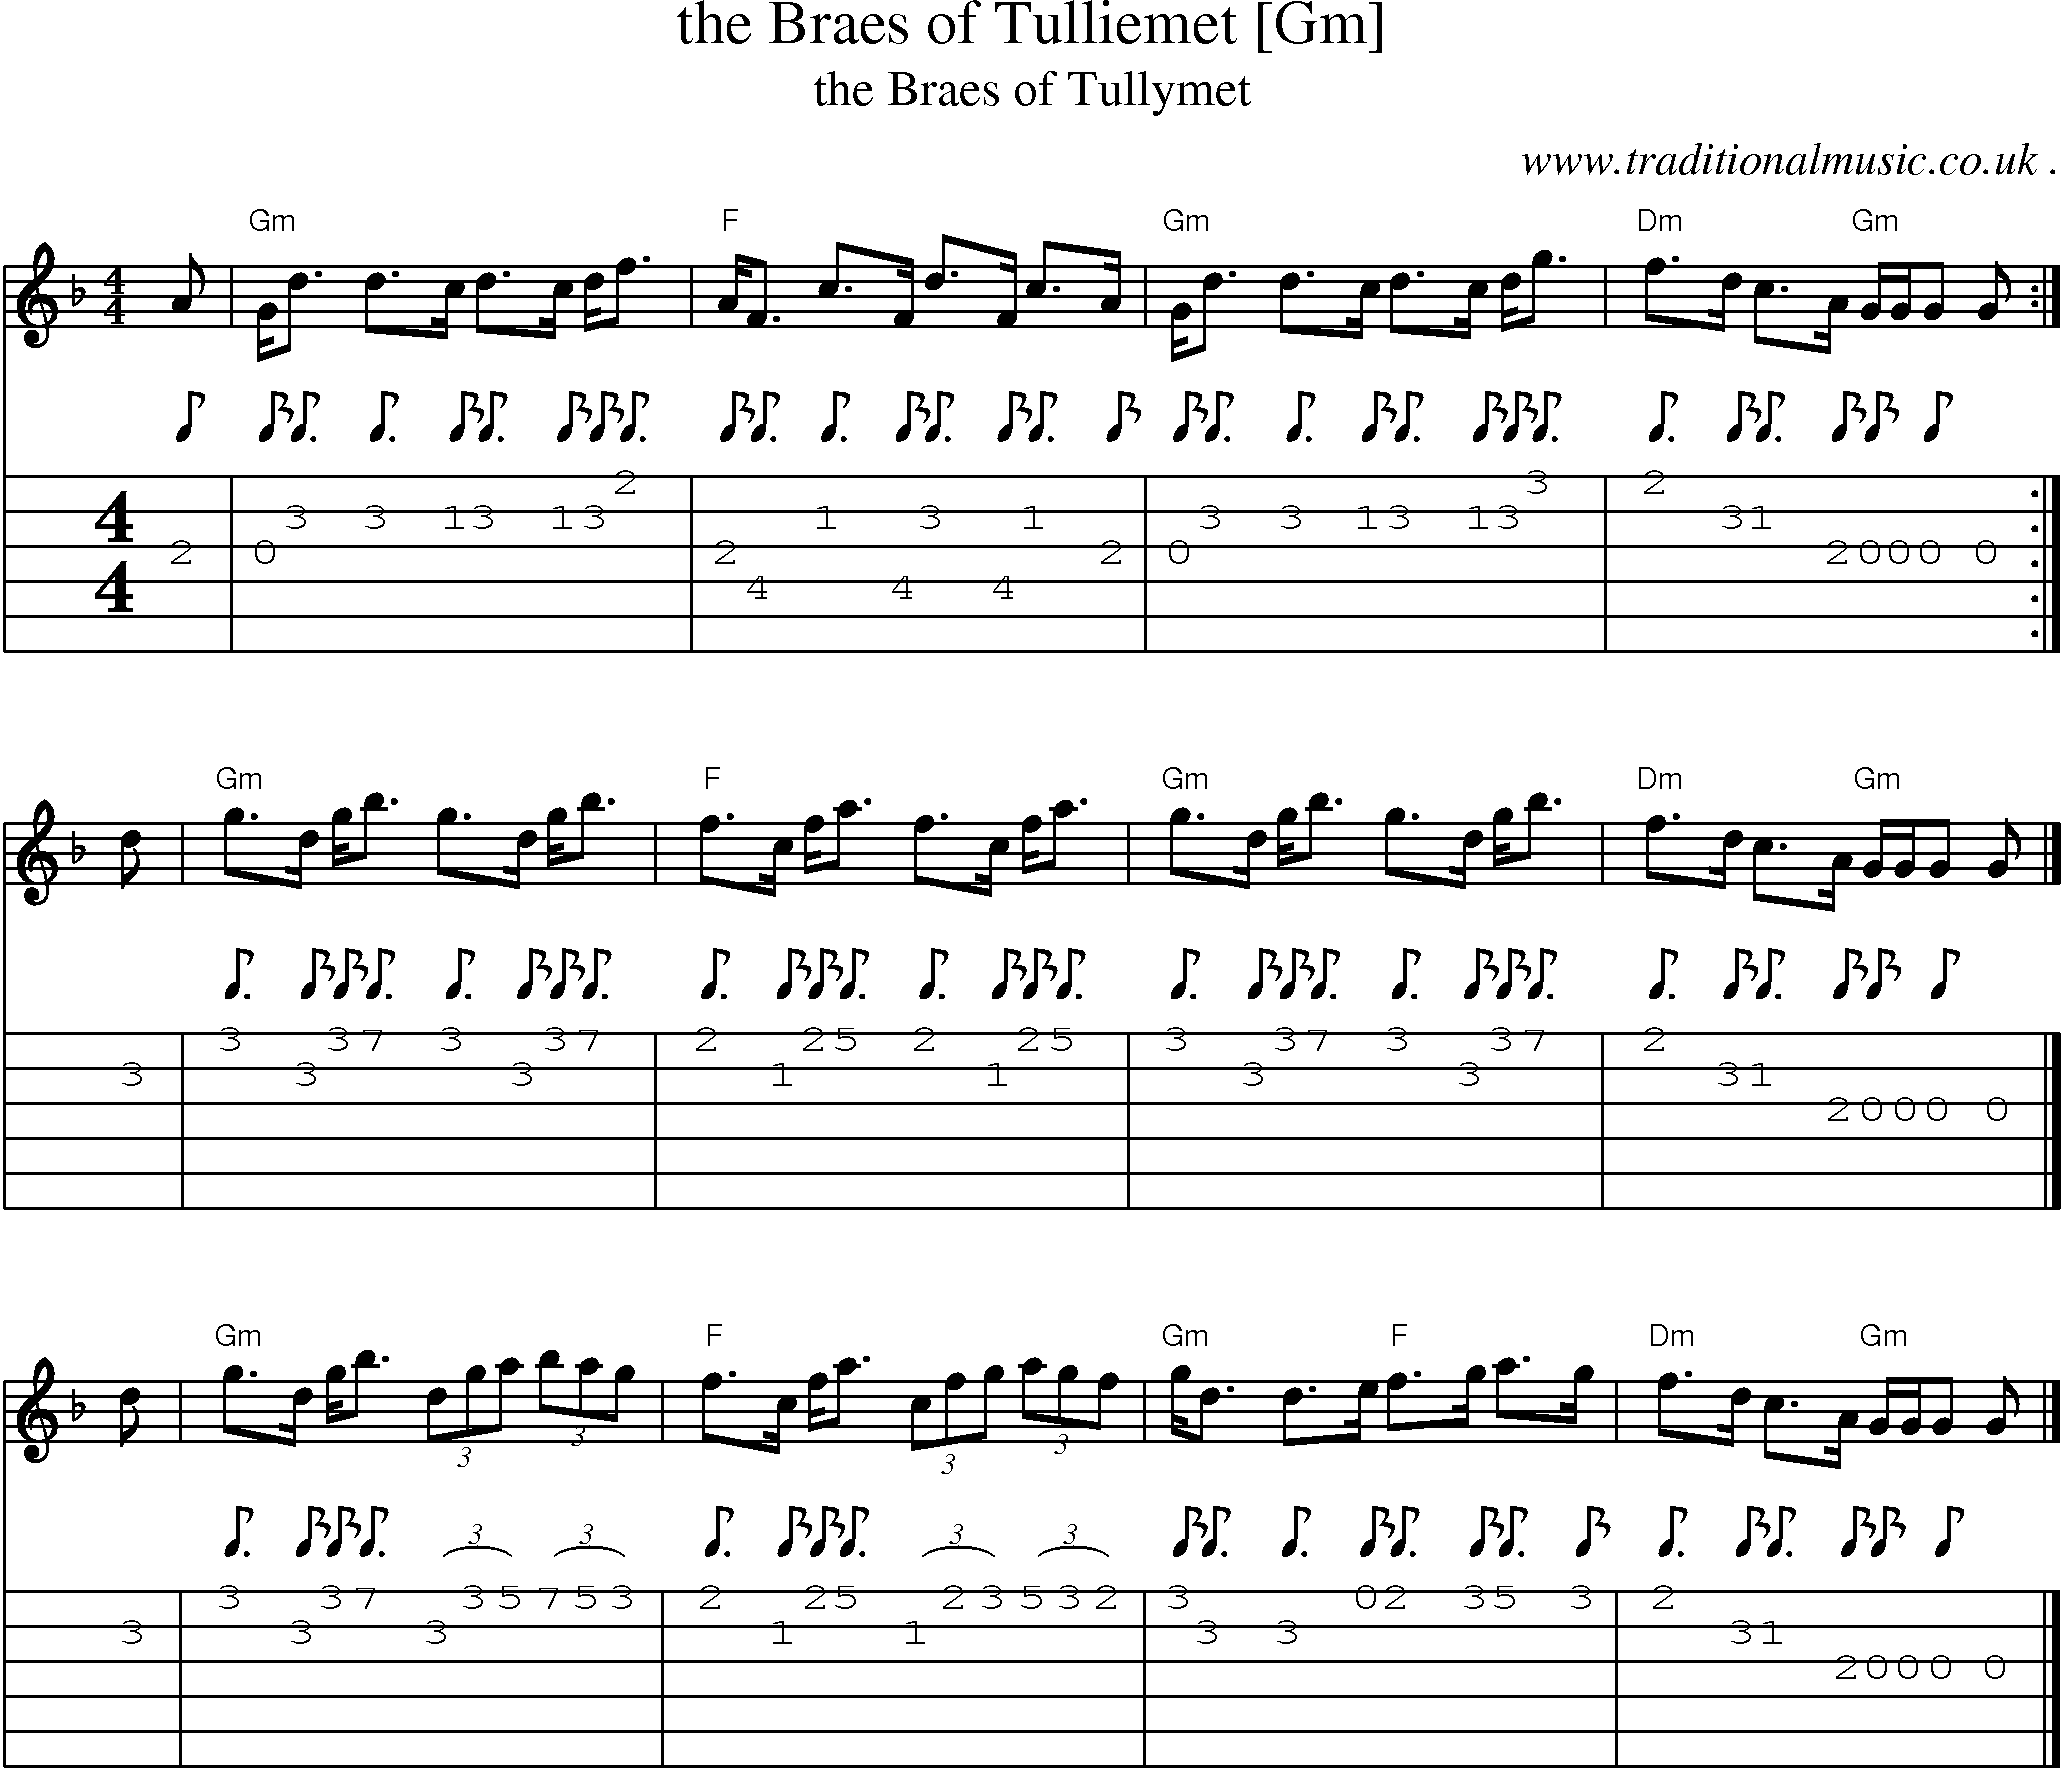 Sheet-music  score, Chords and Guitar Tabs for The Braes Of Tulliemet [gm]